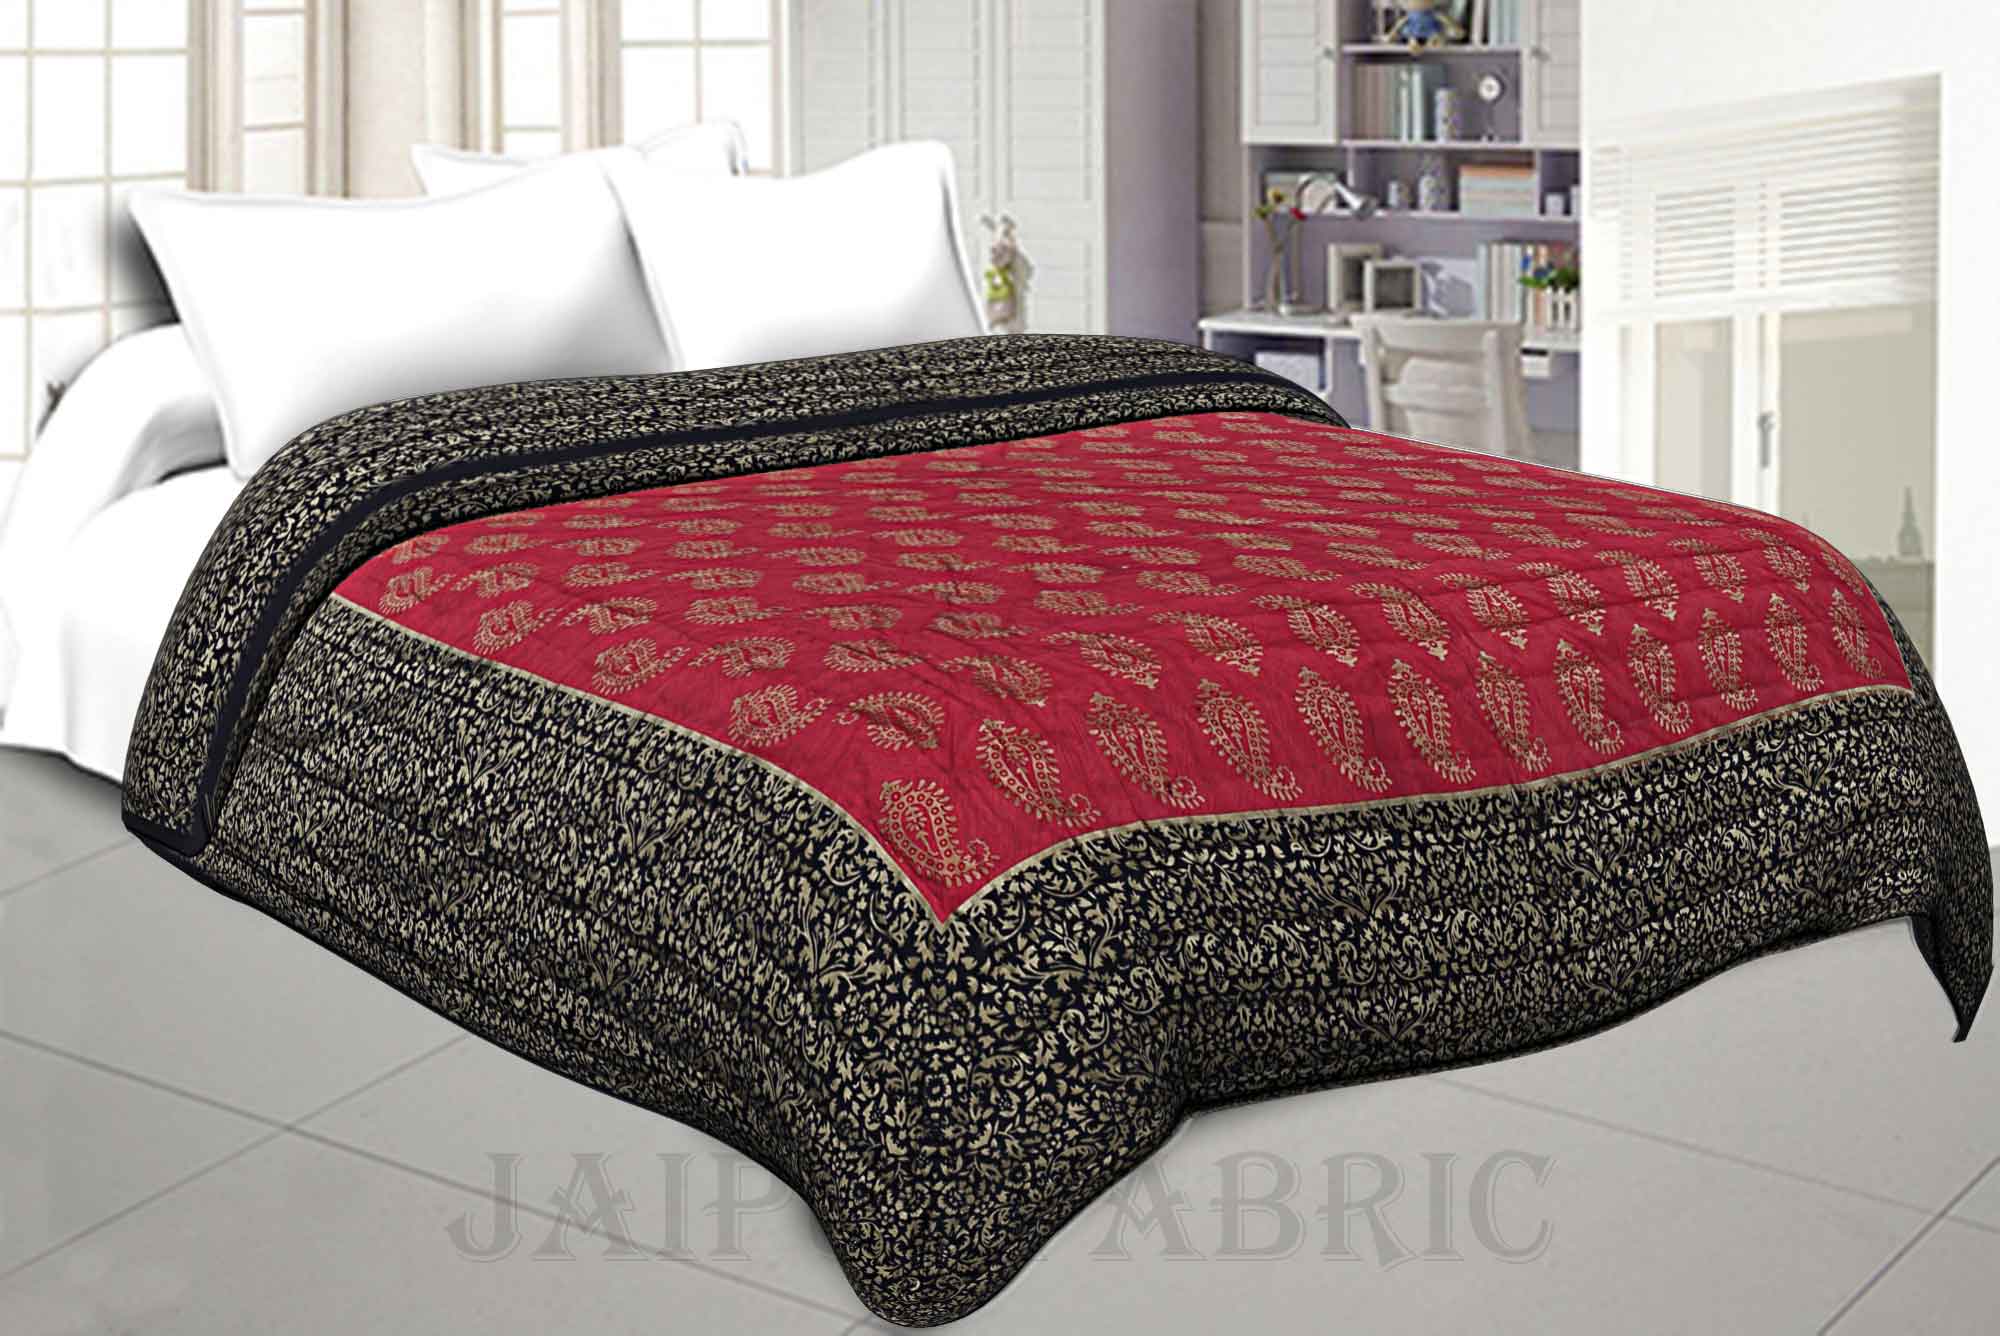 Jaipuri Printed Double Bed Razai Golden Red and Black with Paisley pattern